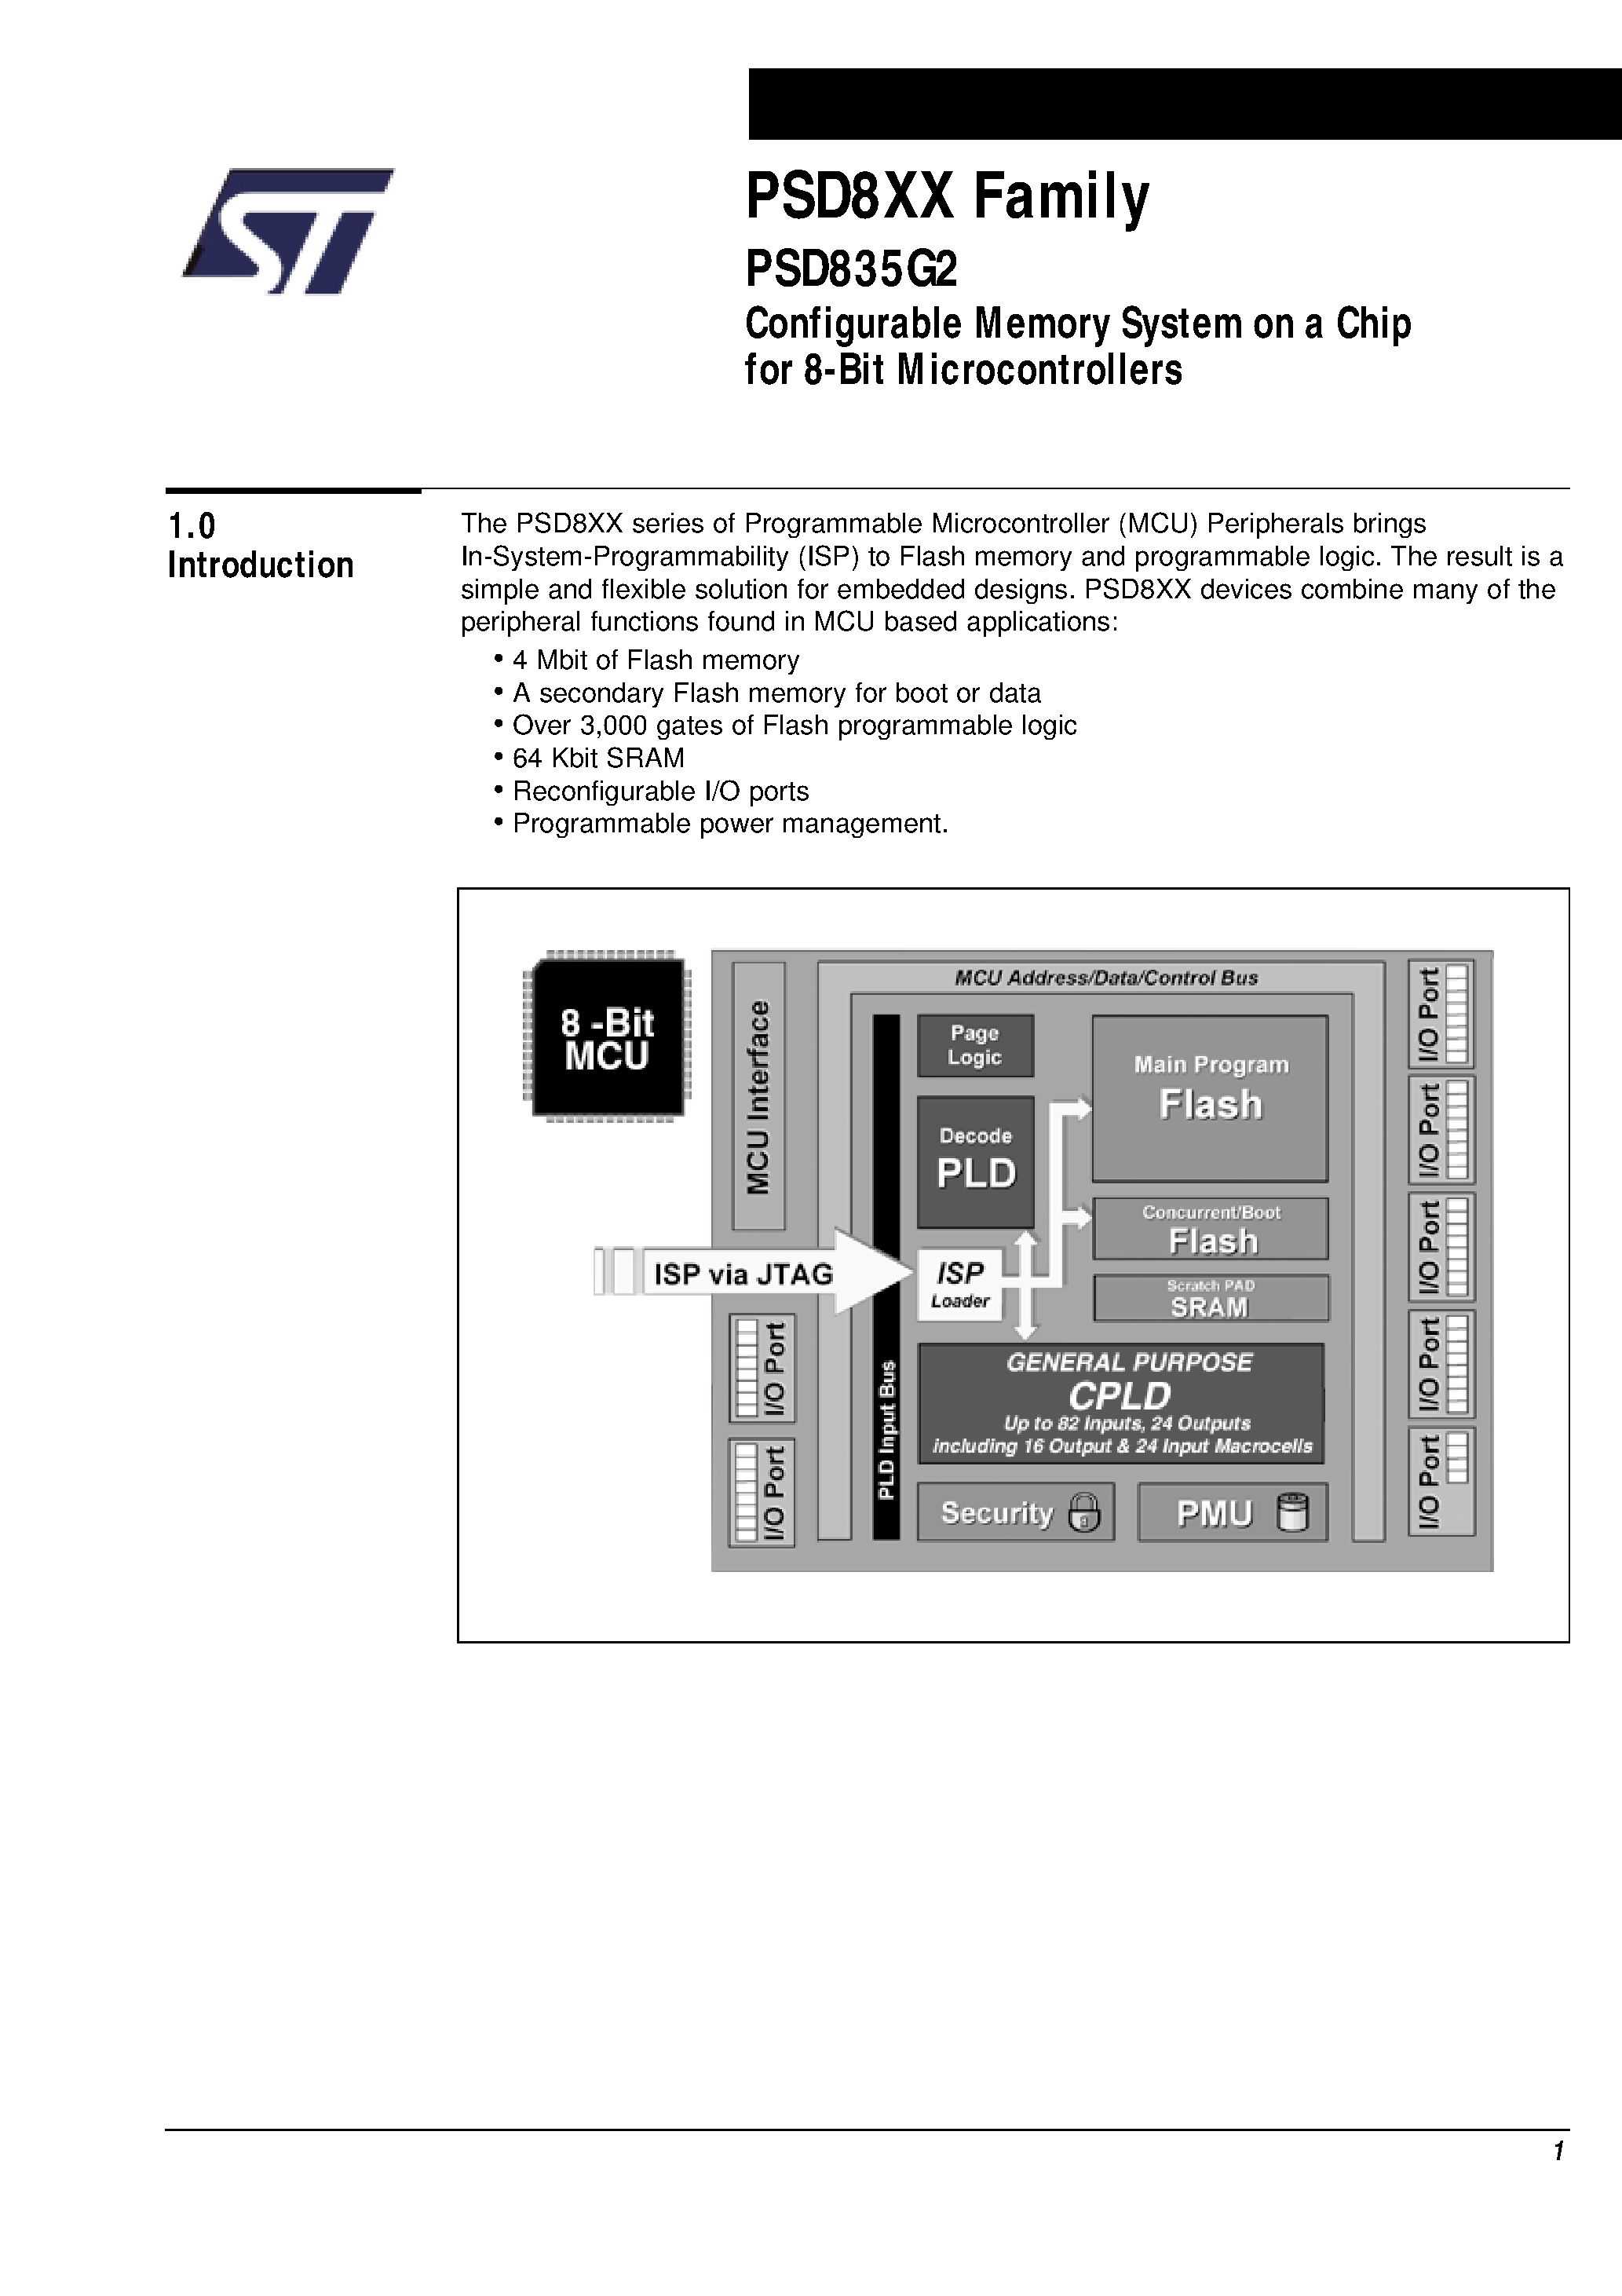 Datasheet PSD835F2V-A-15B81I - Configurable Memory System on a Chip for 8-Bit Microcontrollers page 2